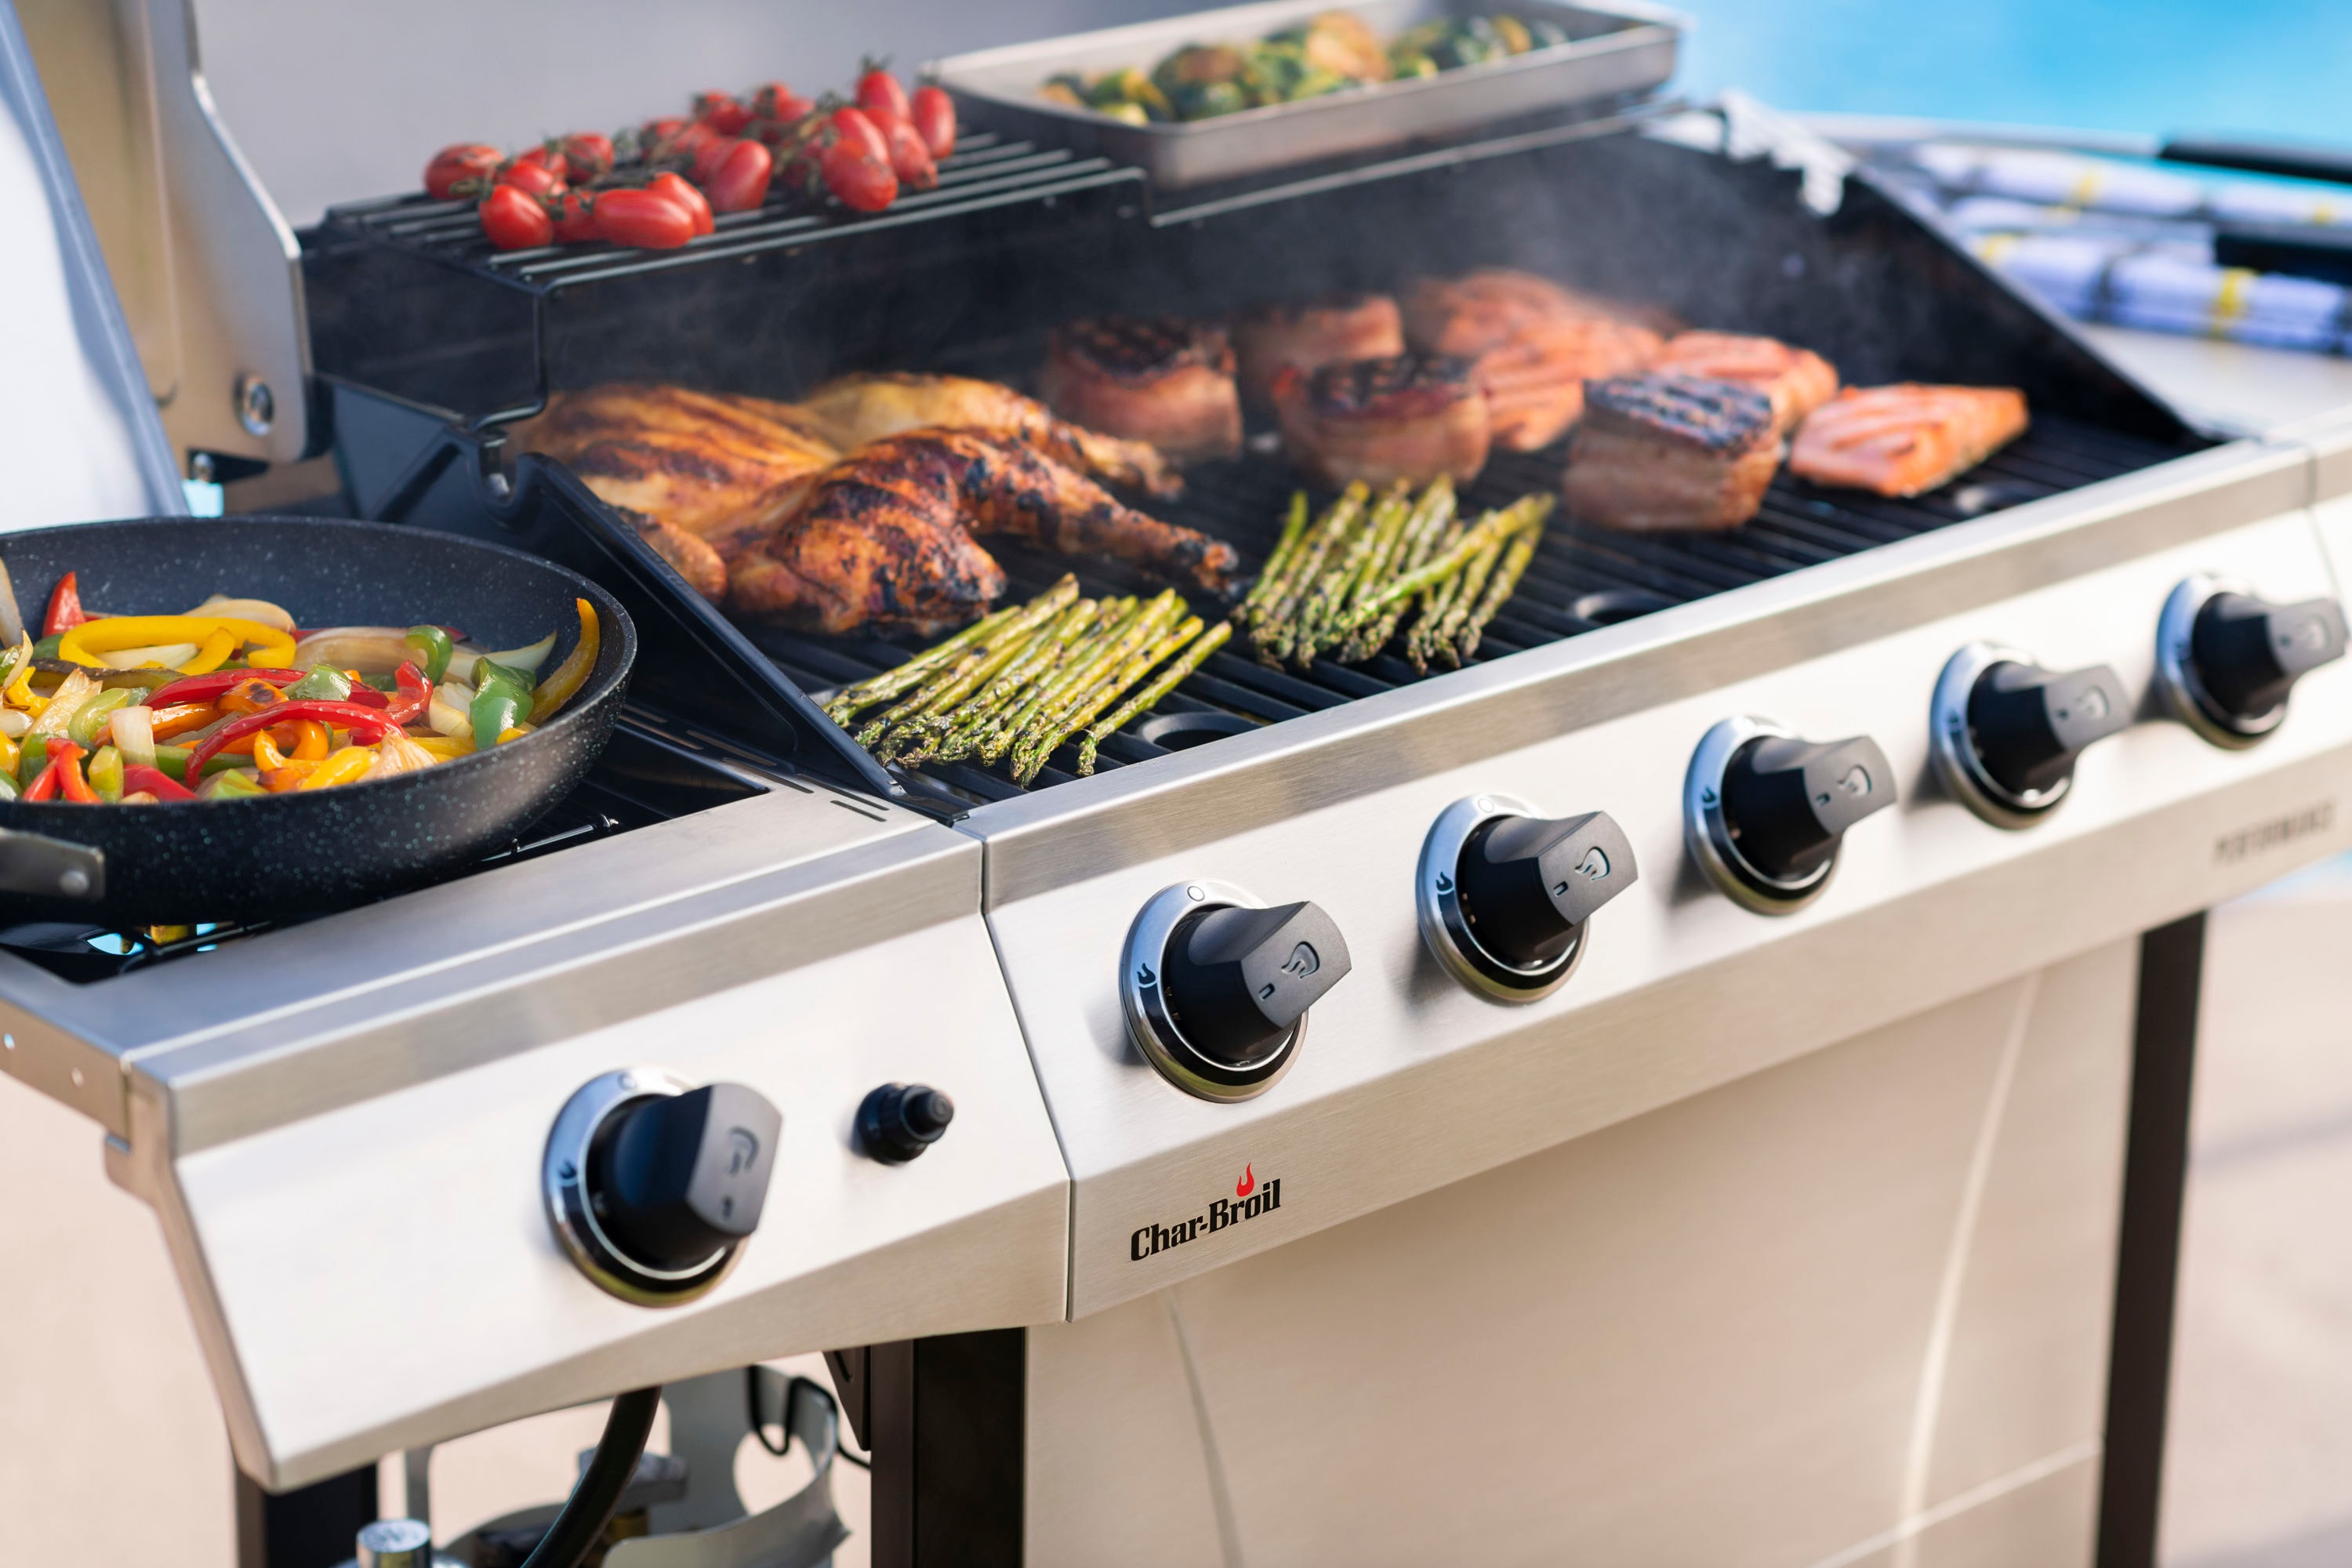 Shop Char-Broil Getting Started with Performance Silver 5-Burner Liquid Propane Gas Grill 1 Burner at Lowes.com